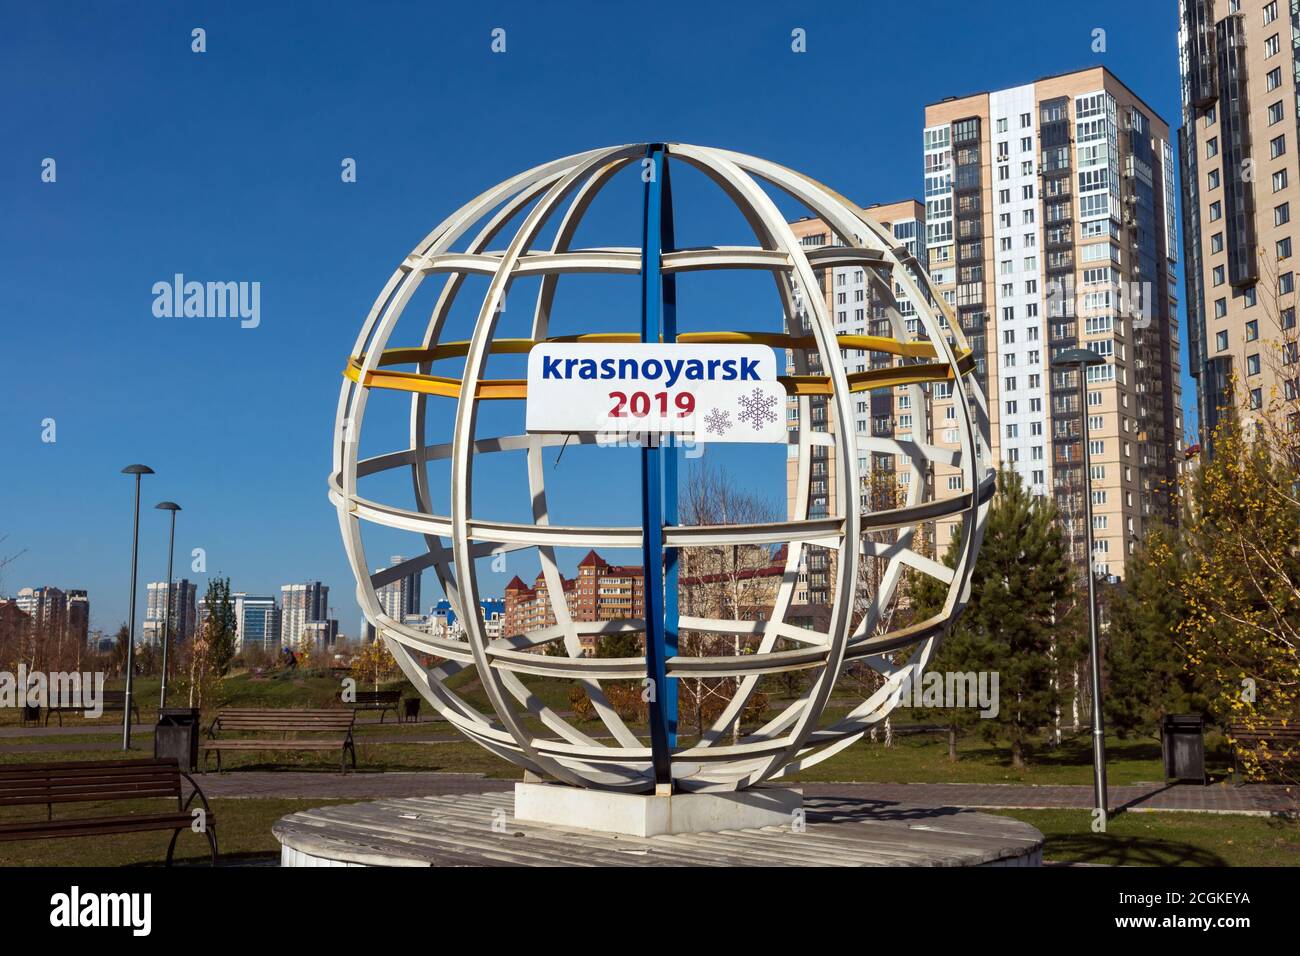 A round metal sculpture with an inscription installed in the park of the city of Krasnoyarsk for the Winter Universiade 2019. Stock Photo